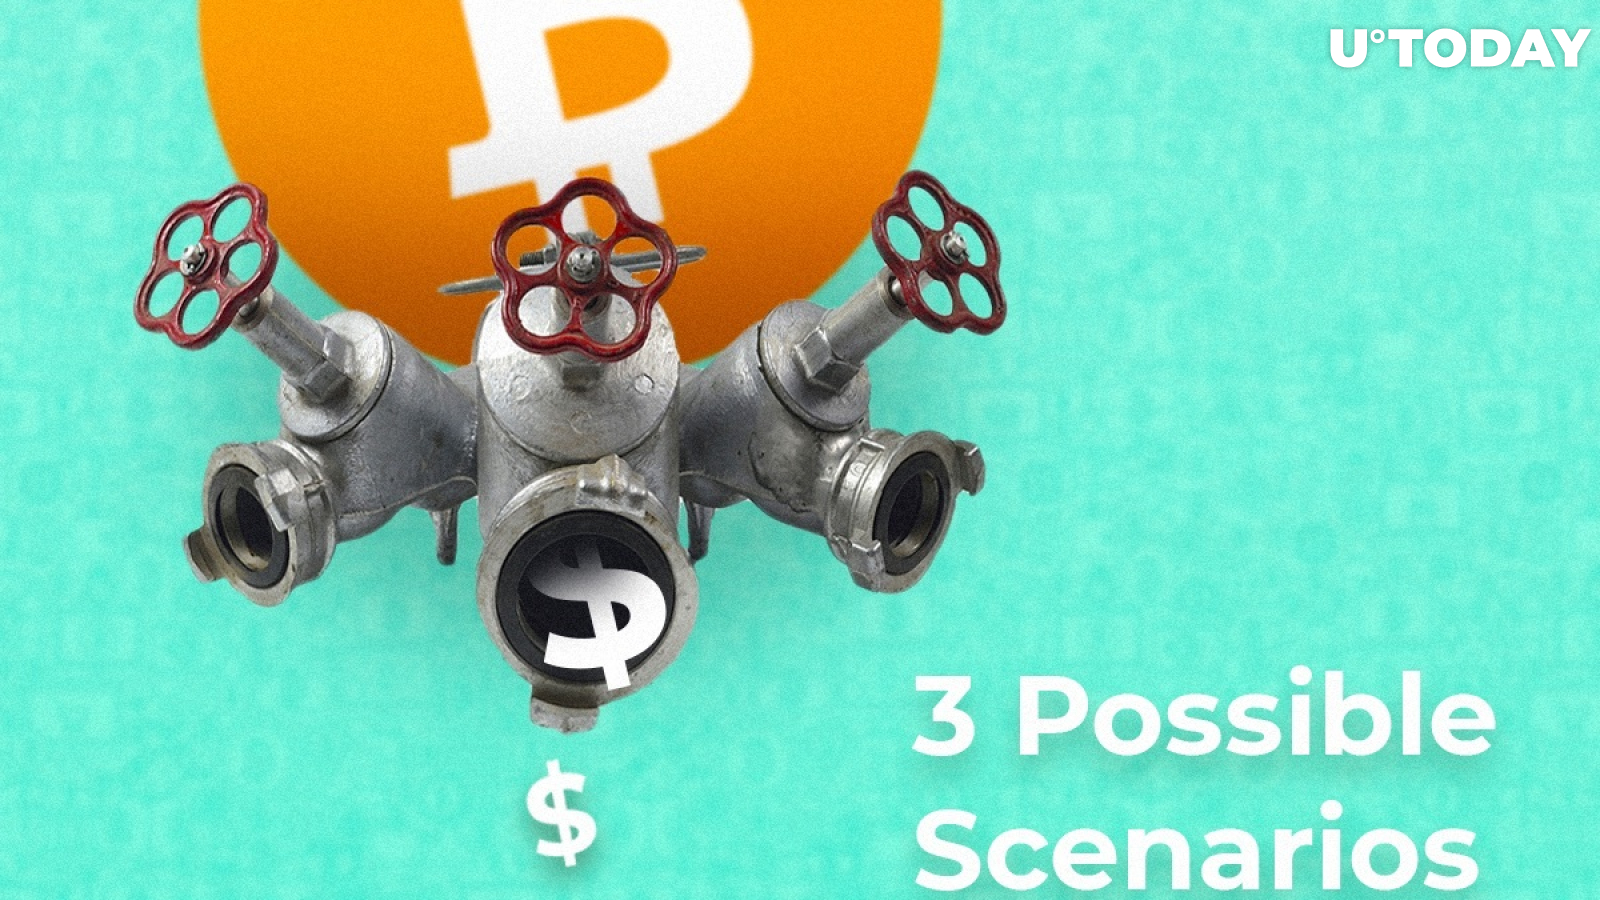 Bitcoin Price Predictions: Is BTC to Reach $5,300 and Fall? 3 Possible Scenarios for BTC in Spring 2019